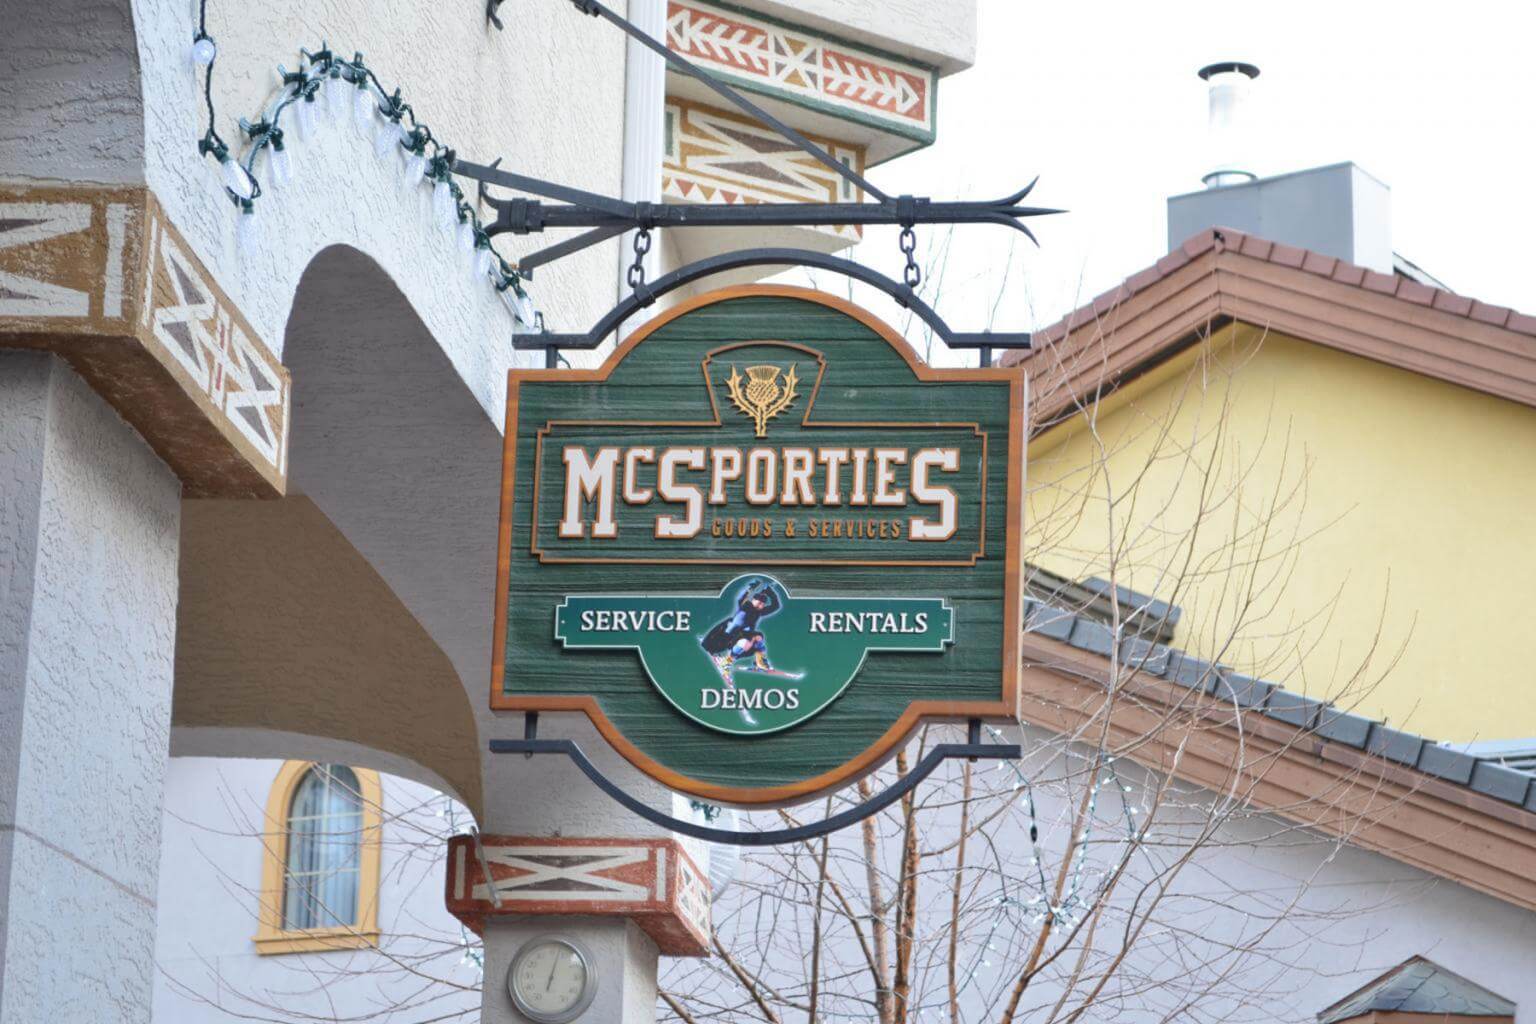 McSporties store sign